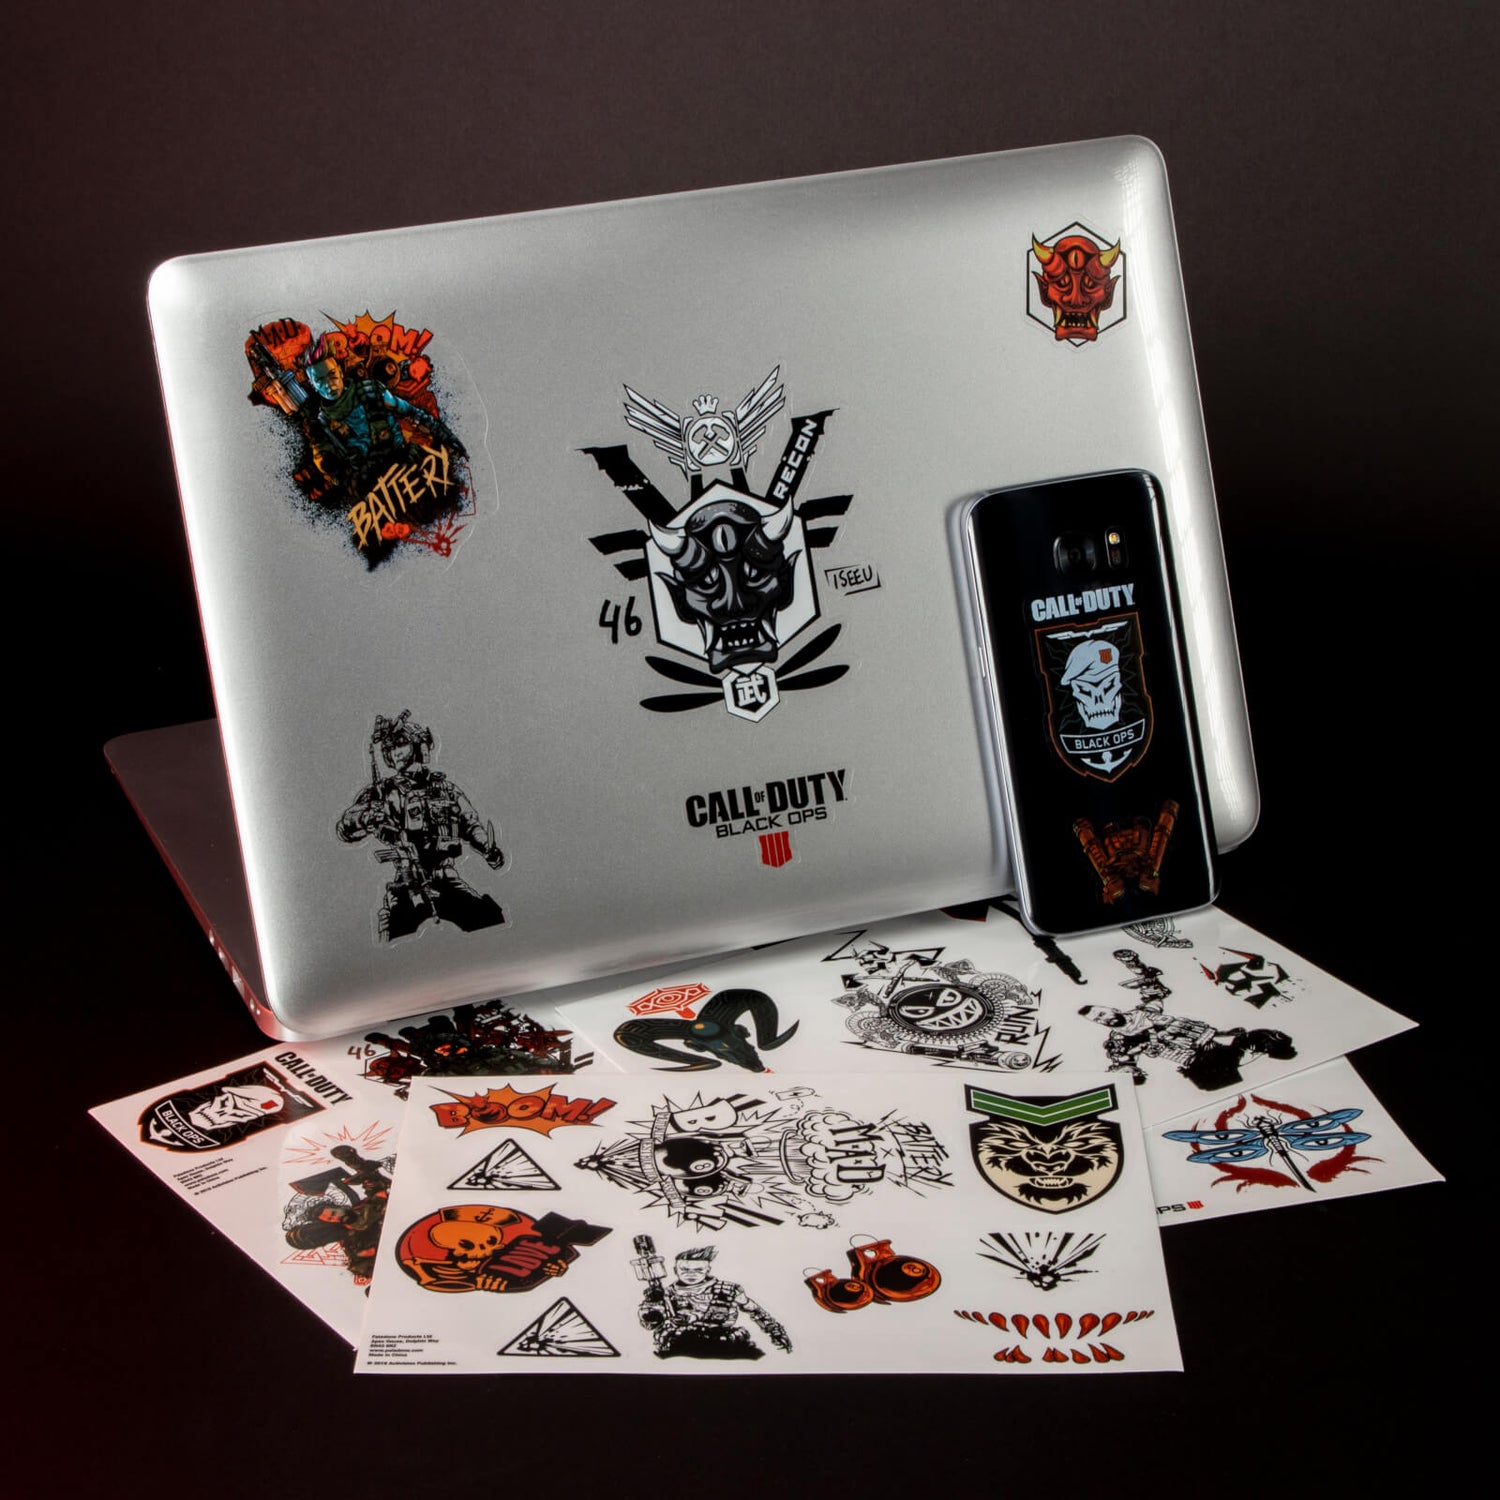 Call of Duty Black Ops 4 Gadget Decals